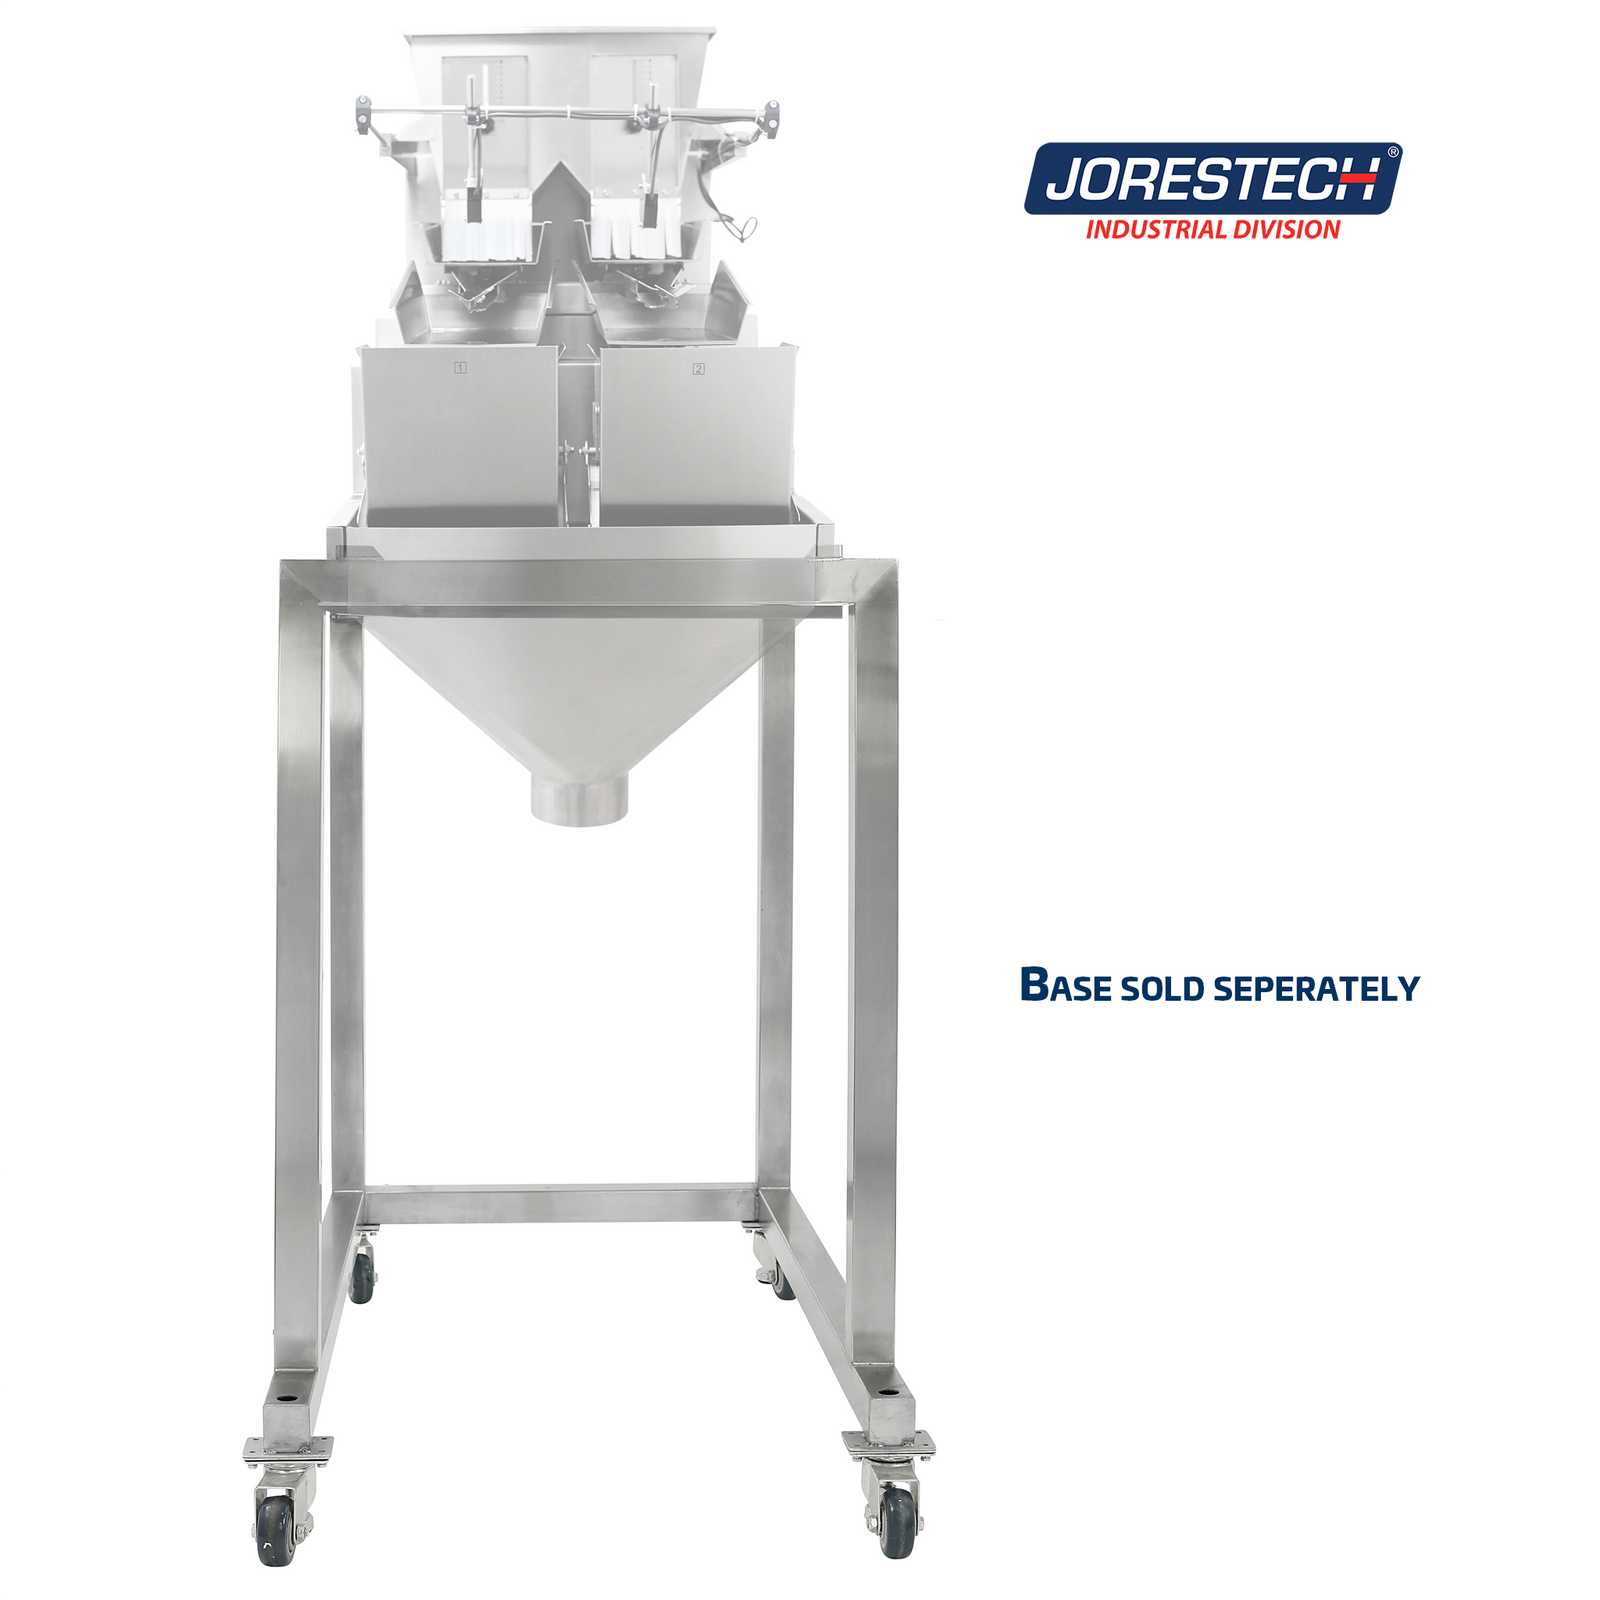 The linear weigher JORES TECHNOLOGIES® parallax 240 for 400 ml positioned on top of the Stainless steel base compatible only with this machine. Text reads: Base sold separately.